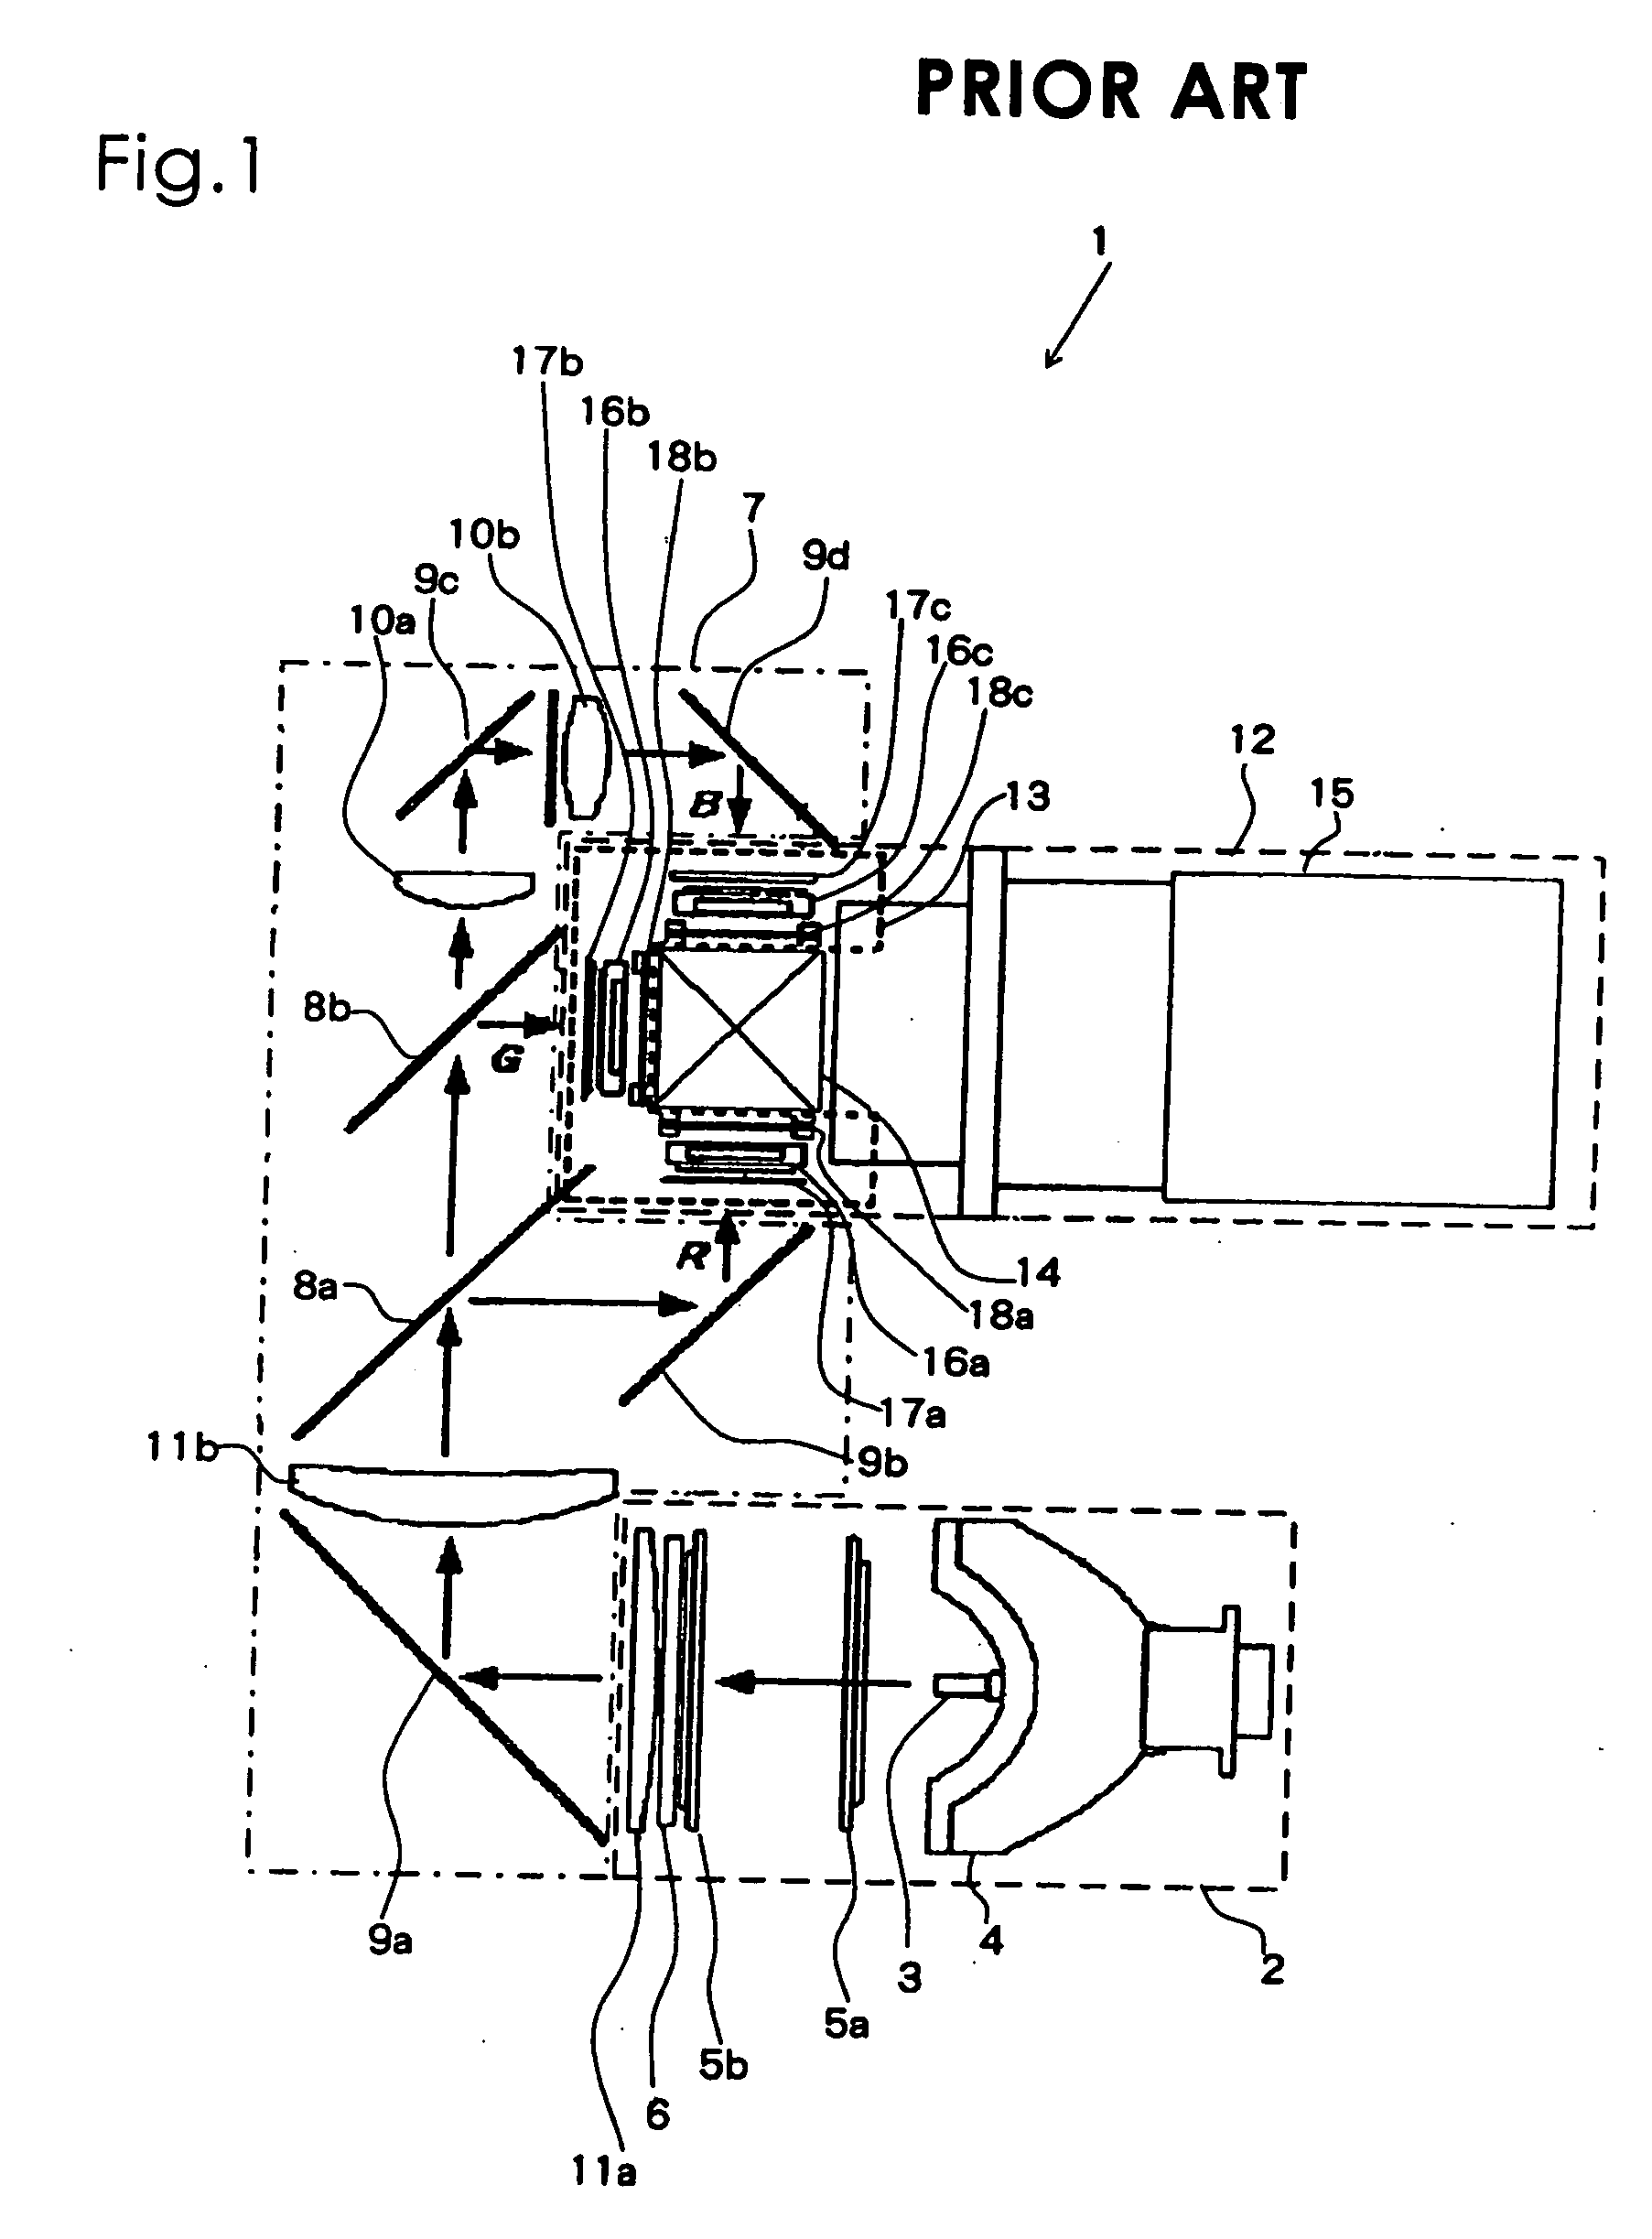 Projection display apparatus using liquid cooling and air cooling